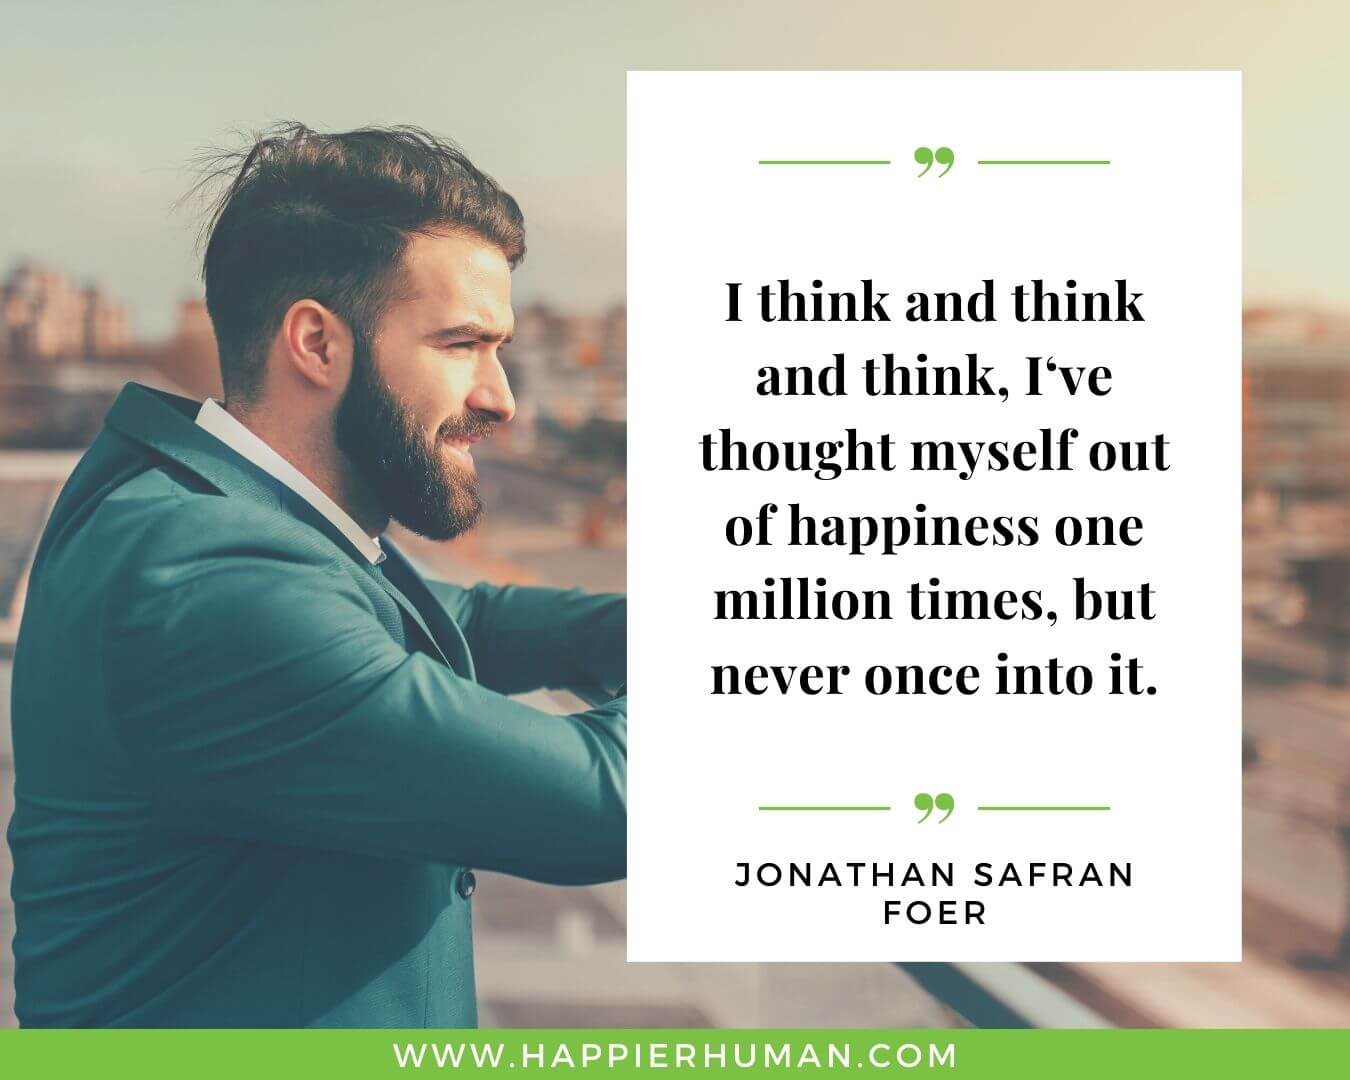 Overthinking Quotes - “I think and think and think, I‘ve thought myself out of happiness one million times, but never once into it." - Jonathan Safran Foer